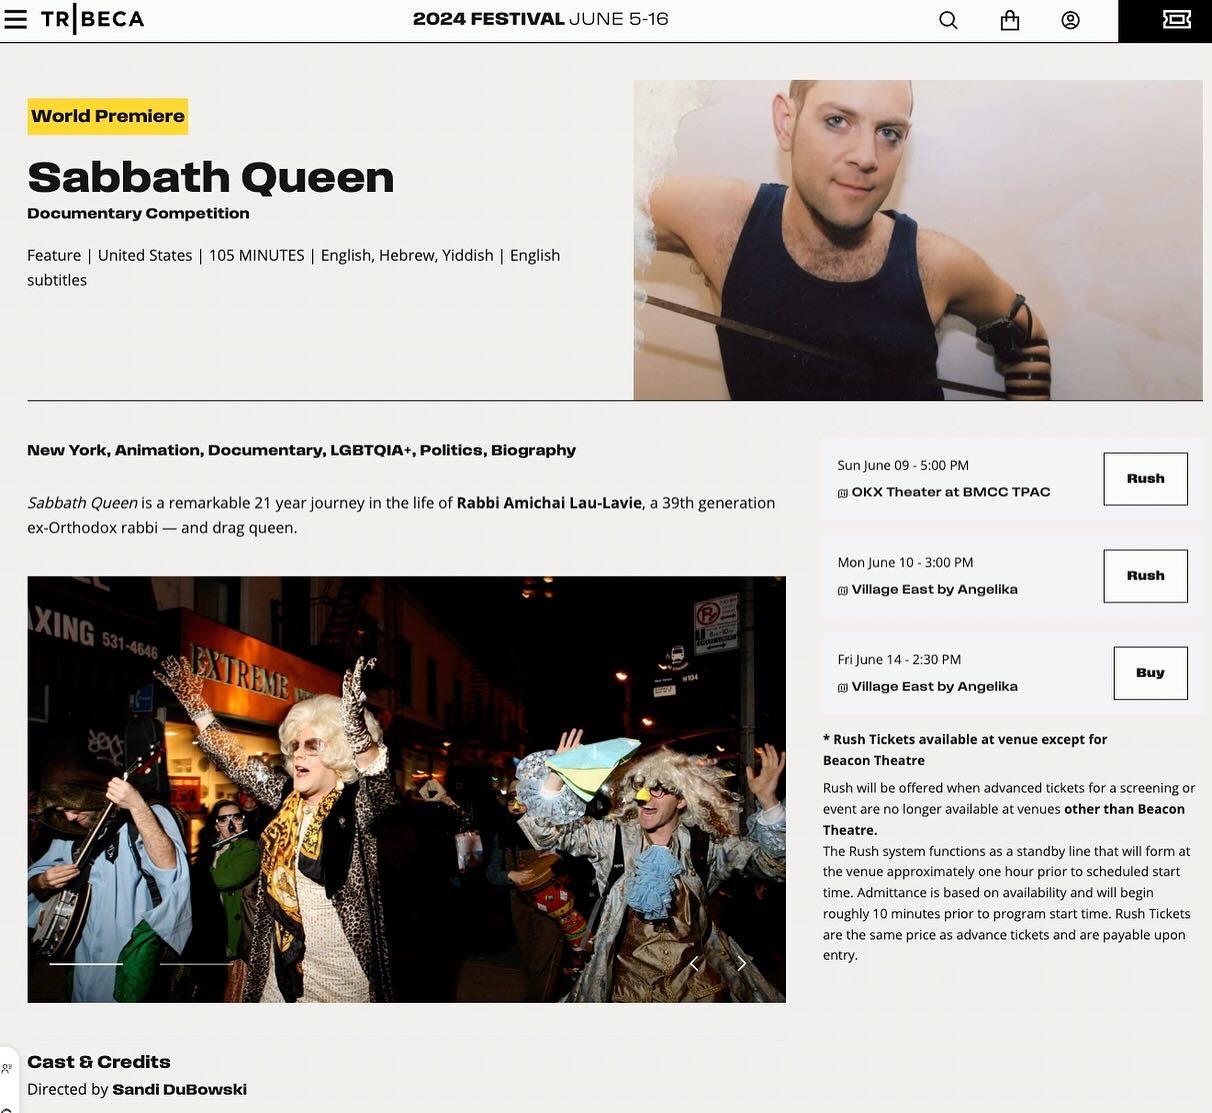 Almost sold out! 🎟️ Mark your calendars and join me for the world premiere of @sabbathqueenfilm at the @tribeca film festival. I will be attending the June 9th screening at 5PM and there are &ldquo;rush tickets&rdquo; available as a standby line one